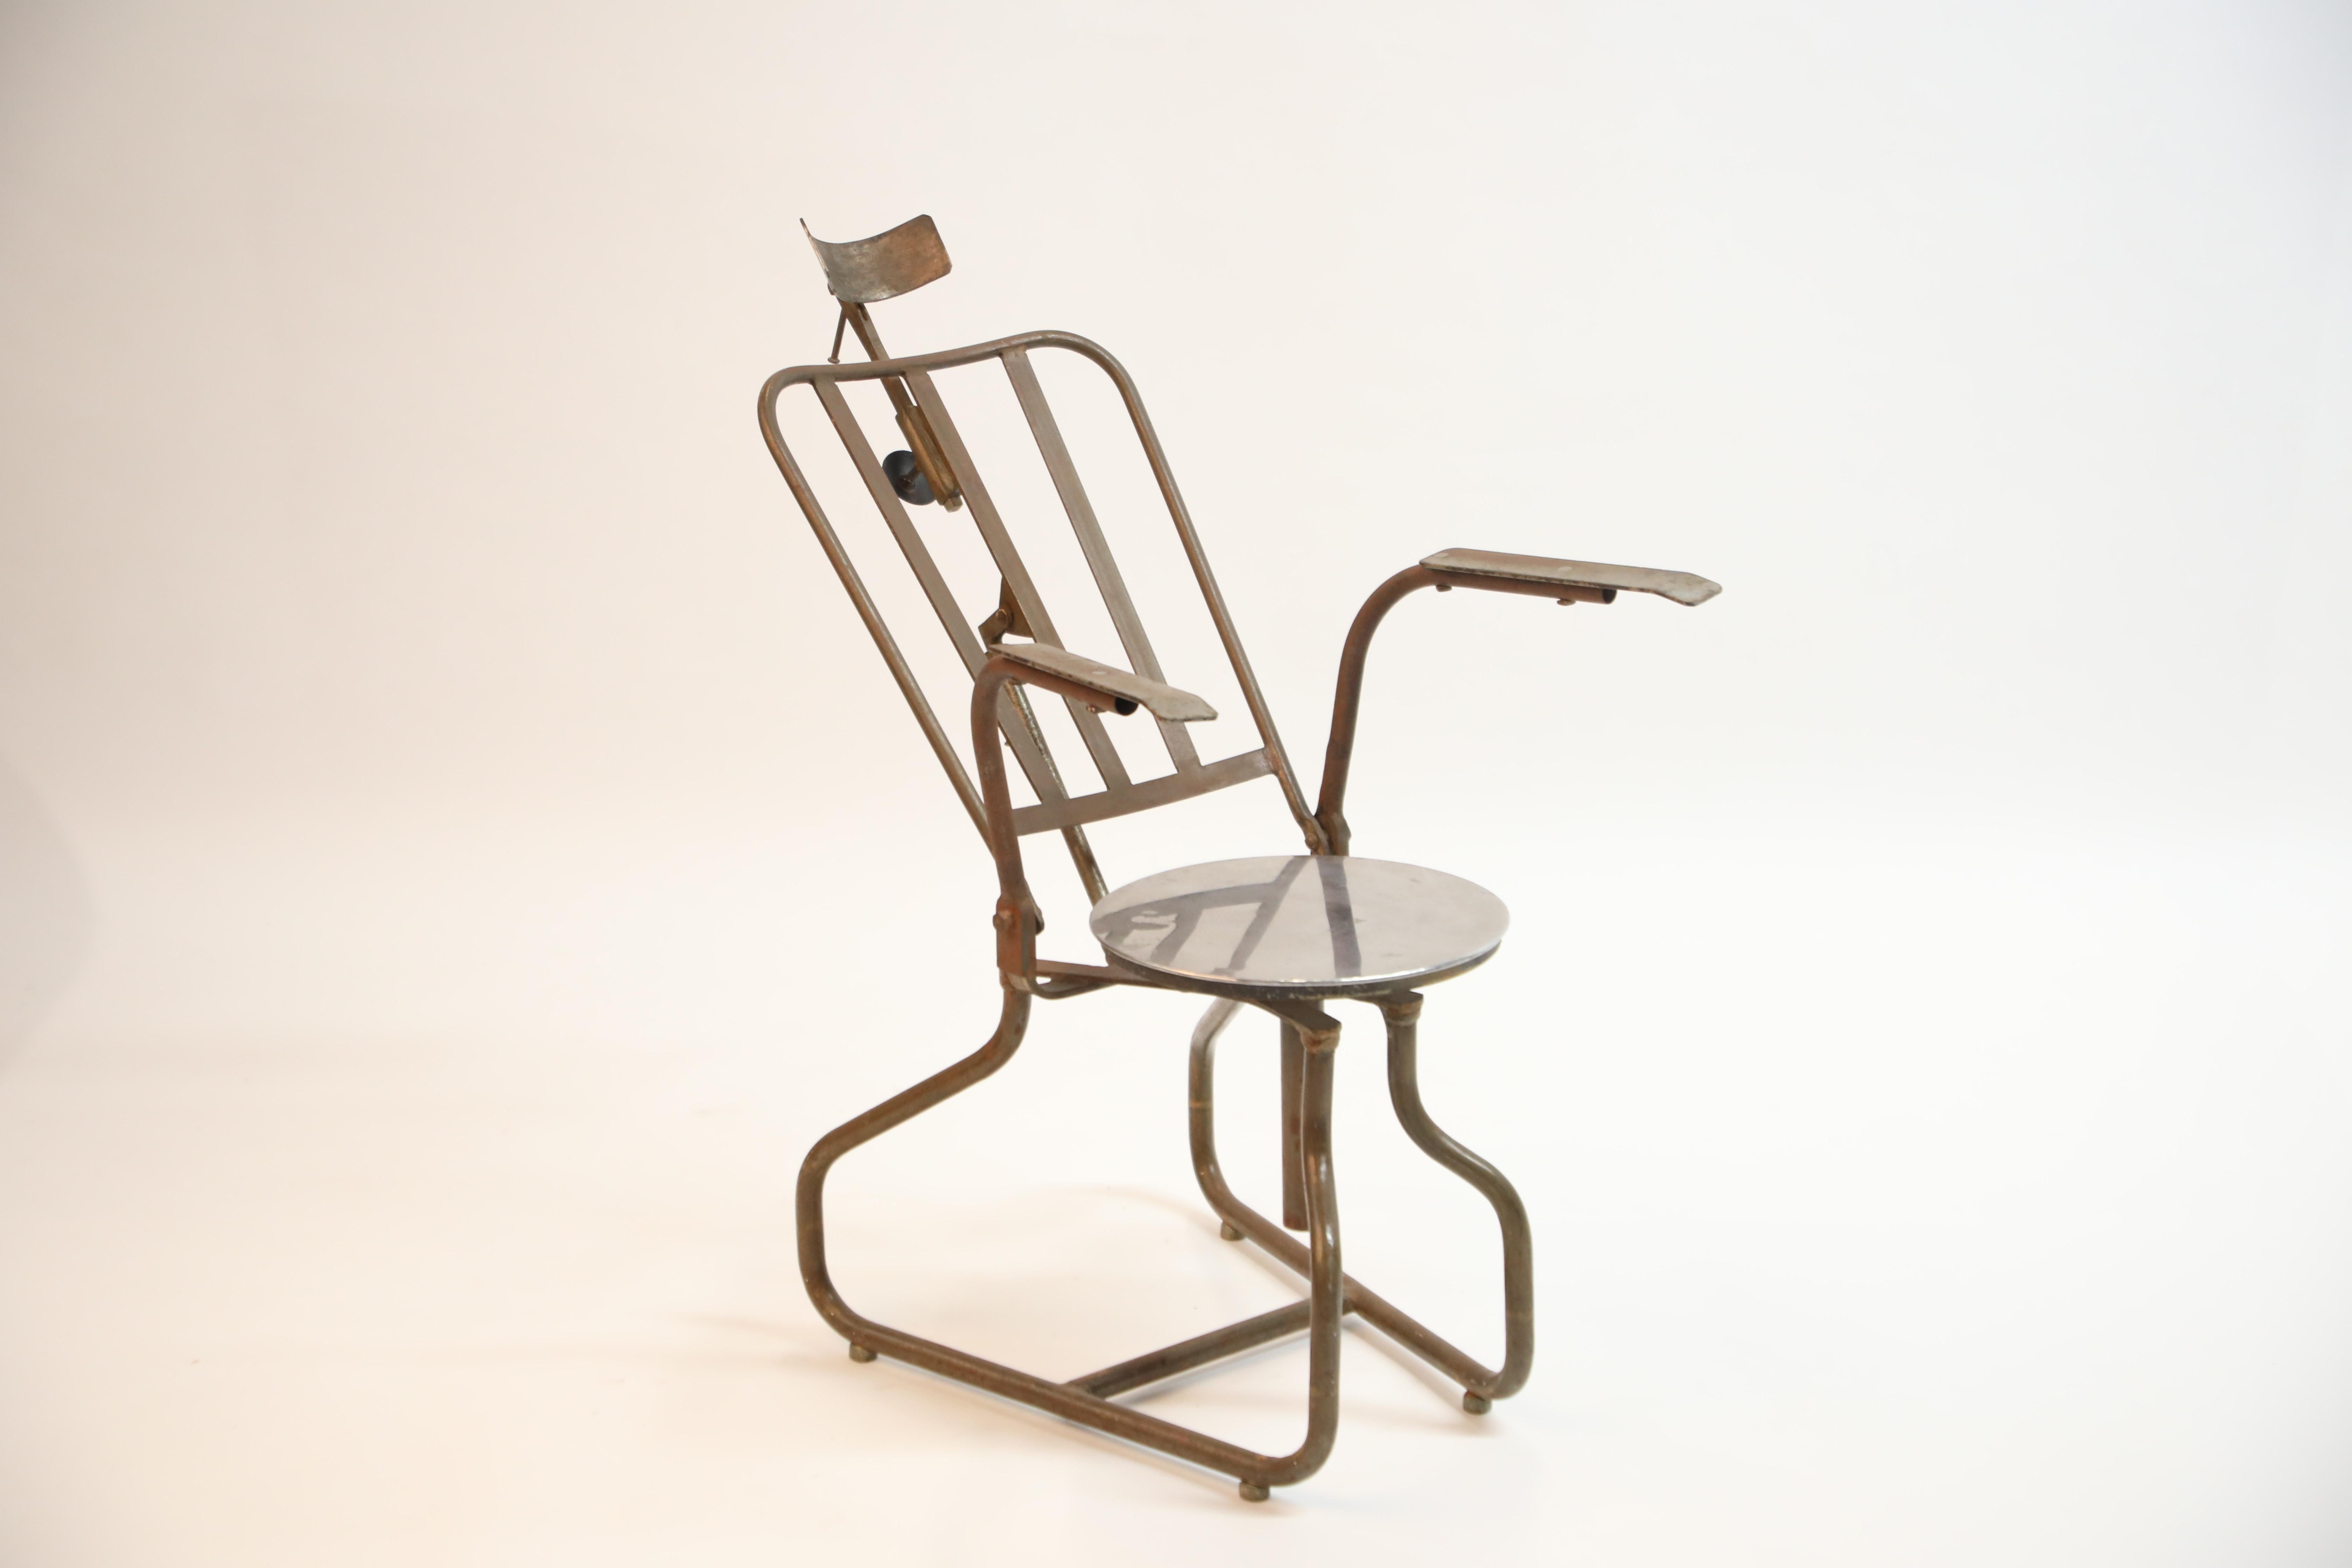 An interesting piece indeed, this industrial metal dental chair from Brazil was probably created in the early 1900s. This statement piece can definitely demand intrigue in a room and serve as the perfect conversation starter. Consider using it as a